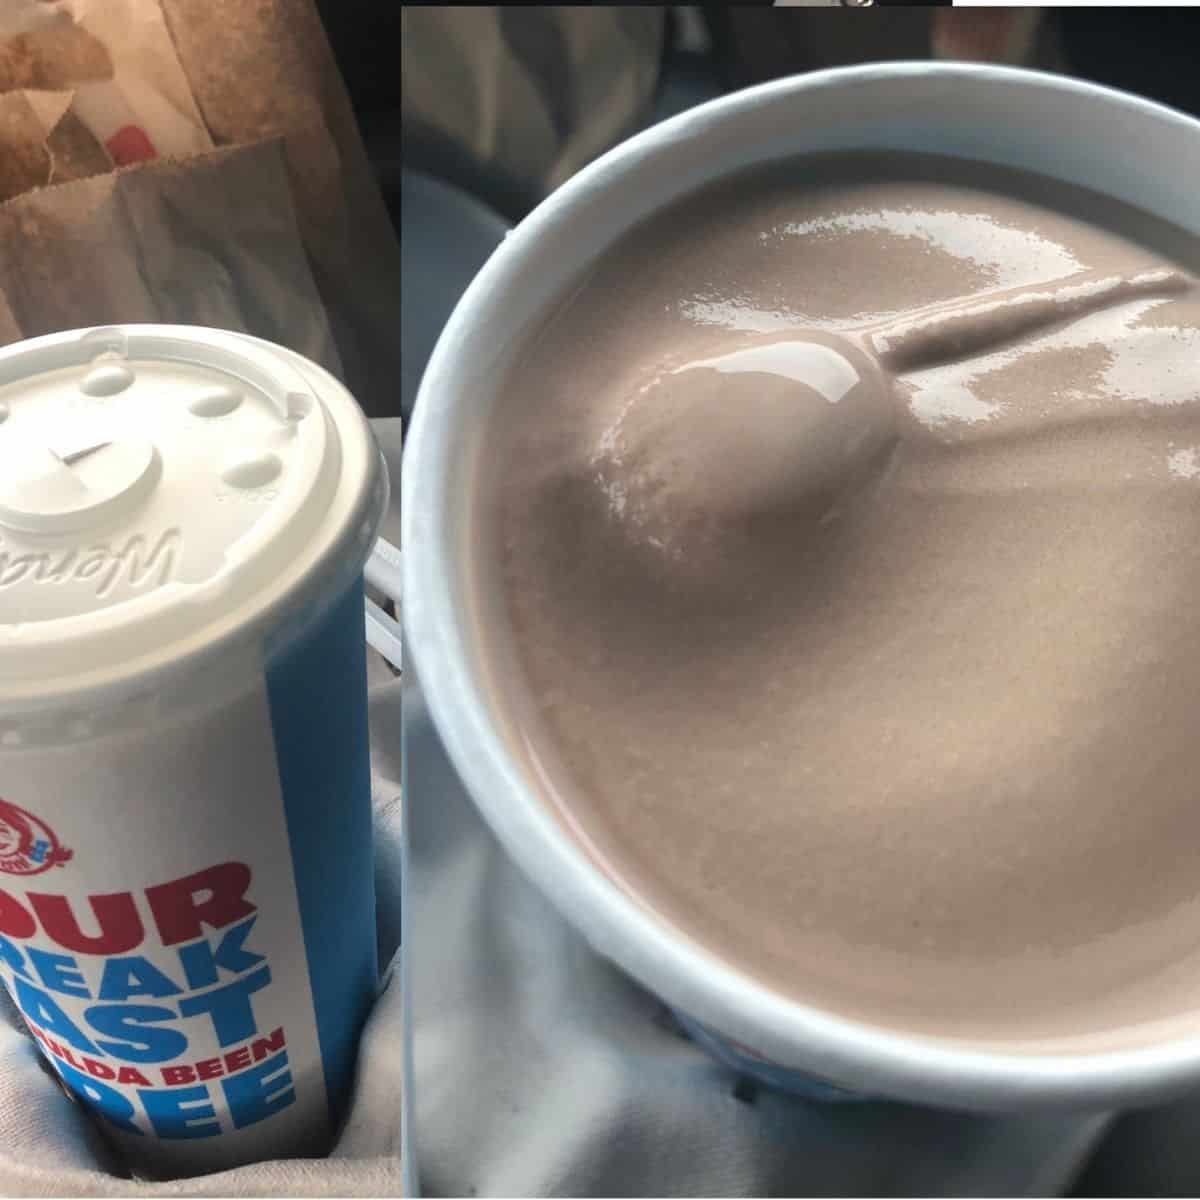 Wendy's Chocolate Frosty and vanilla frosty in a blue and white cup with a lid and a brown paper bag